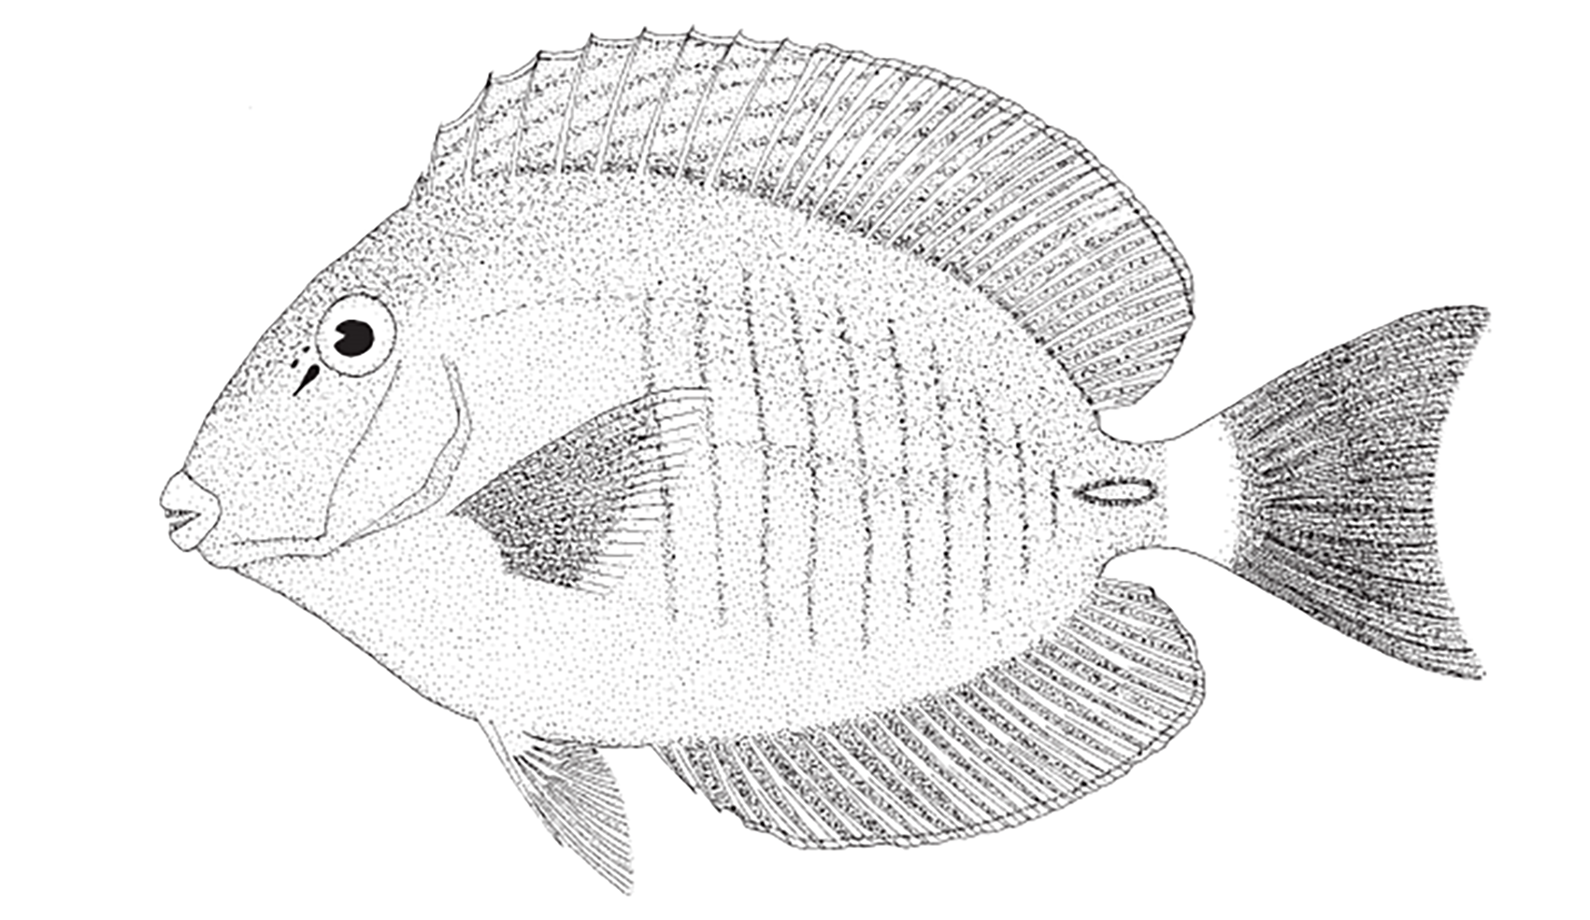 https://ncfishes.com/wp-content/uploads/2021/02/Doctorfish-Acanthurus-chirurgus-Source-FAO-2002.png